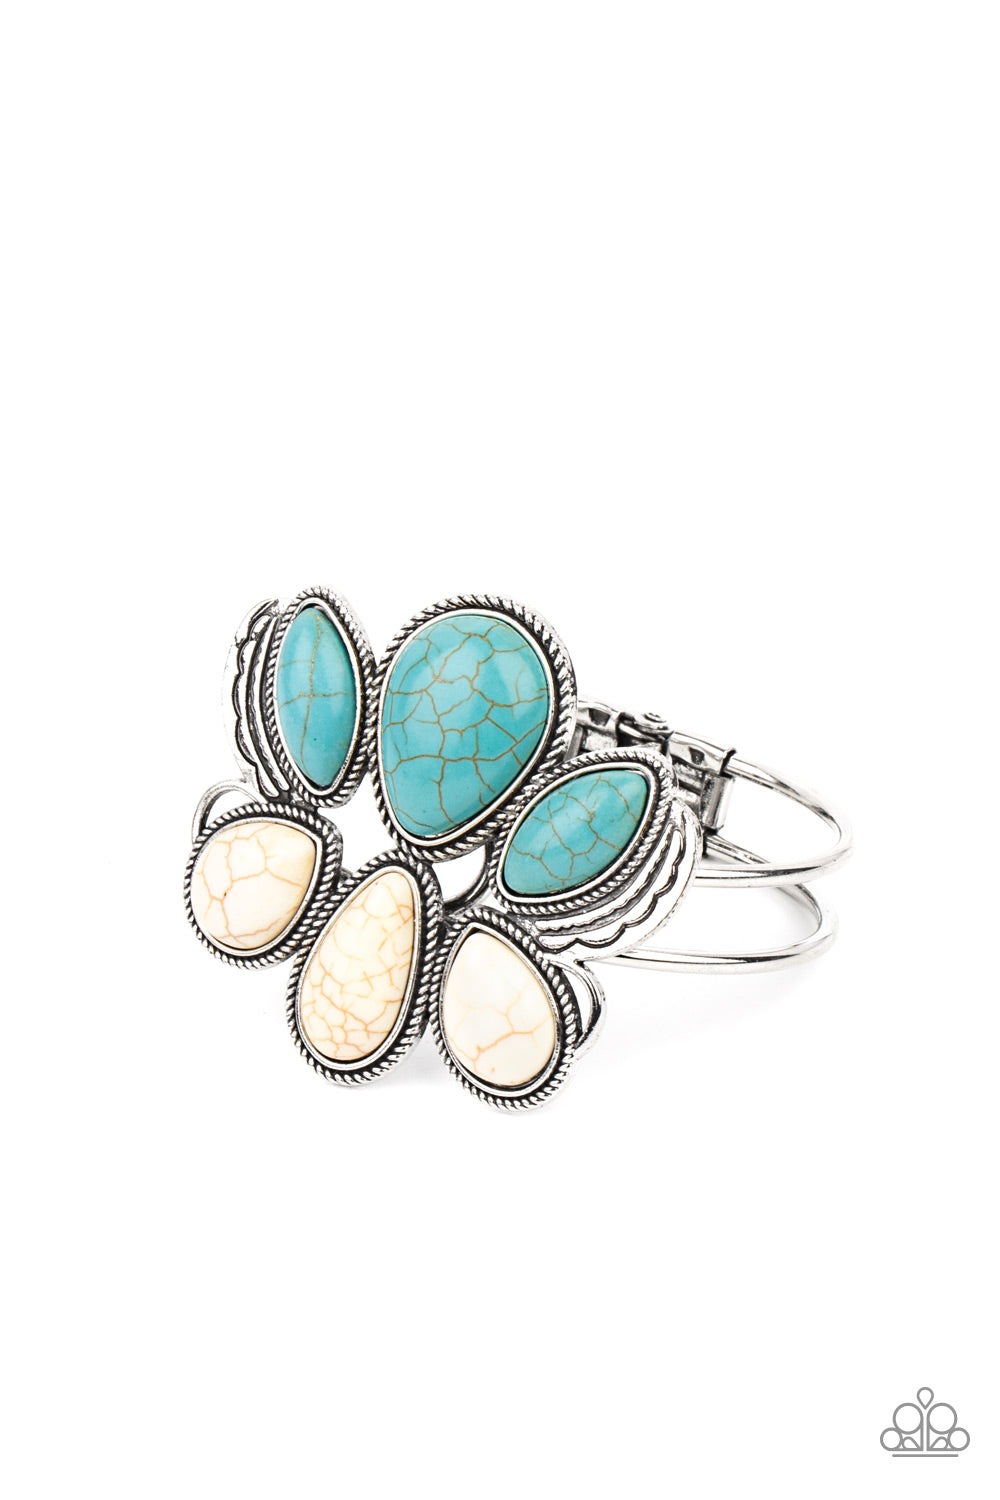 Botanical Badlands White Cuff Bracelet - Paparazzi Accessories  Encased in rope-like silver accents, a series of oversized oval and teardrop turquoise and white stone frames stack into a lotus-like floral frame atop a layered silver cuff. Features a hinged closure.  All Paparazzi Accessories are lead free and nickel free!  Sold as one individual bracelet.